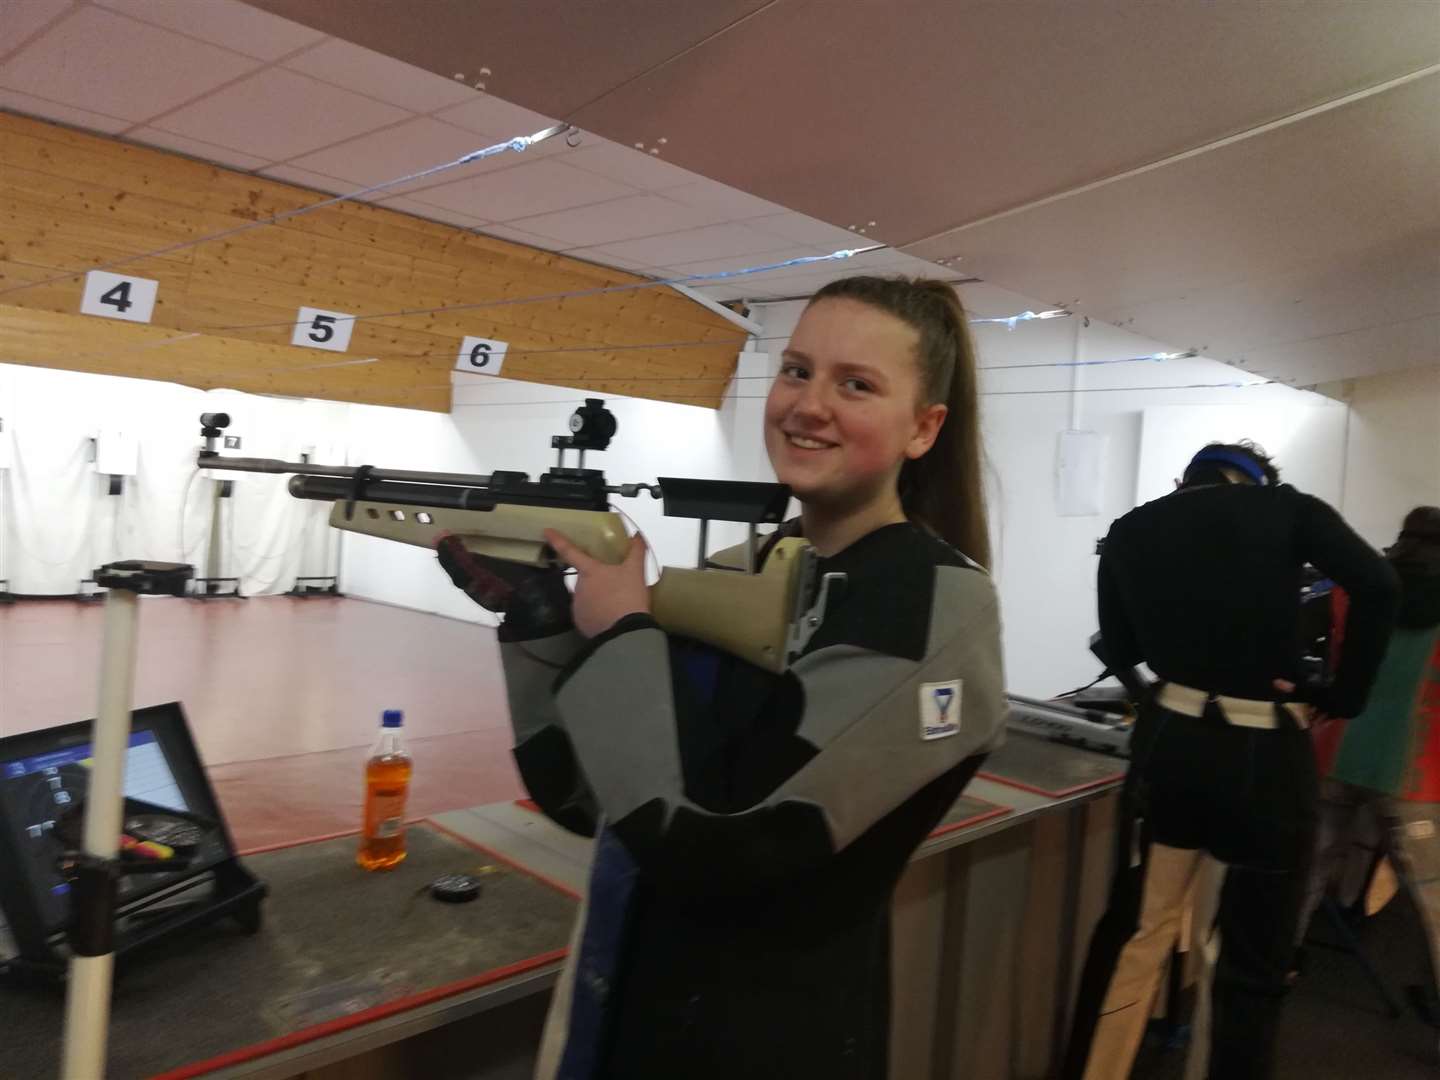 INVERNESS shooting club Target Technique had three members who took part in Scottish National Grand Prix 5 held in Glenrothes. Inverness High School pupil Nikkayla Johnson pictured recorded a personal best of 511.8. It was an impressive performance by the 15-year-old in her first competitio, Culloden Academy pupil Sam Johnston (14) scored 525 while Lauren Rogers (28) came 10th in her competiton.